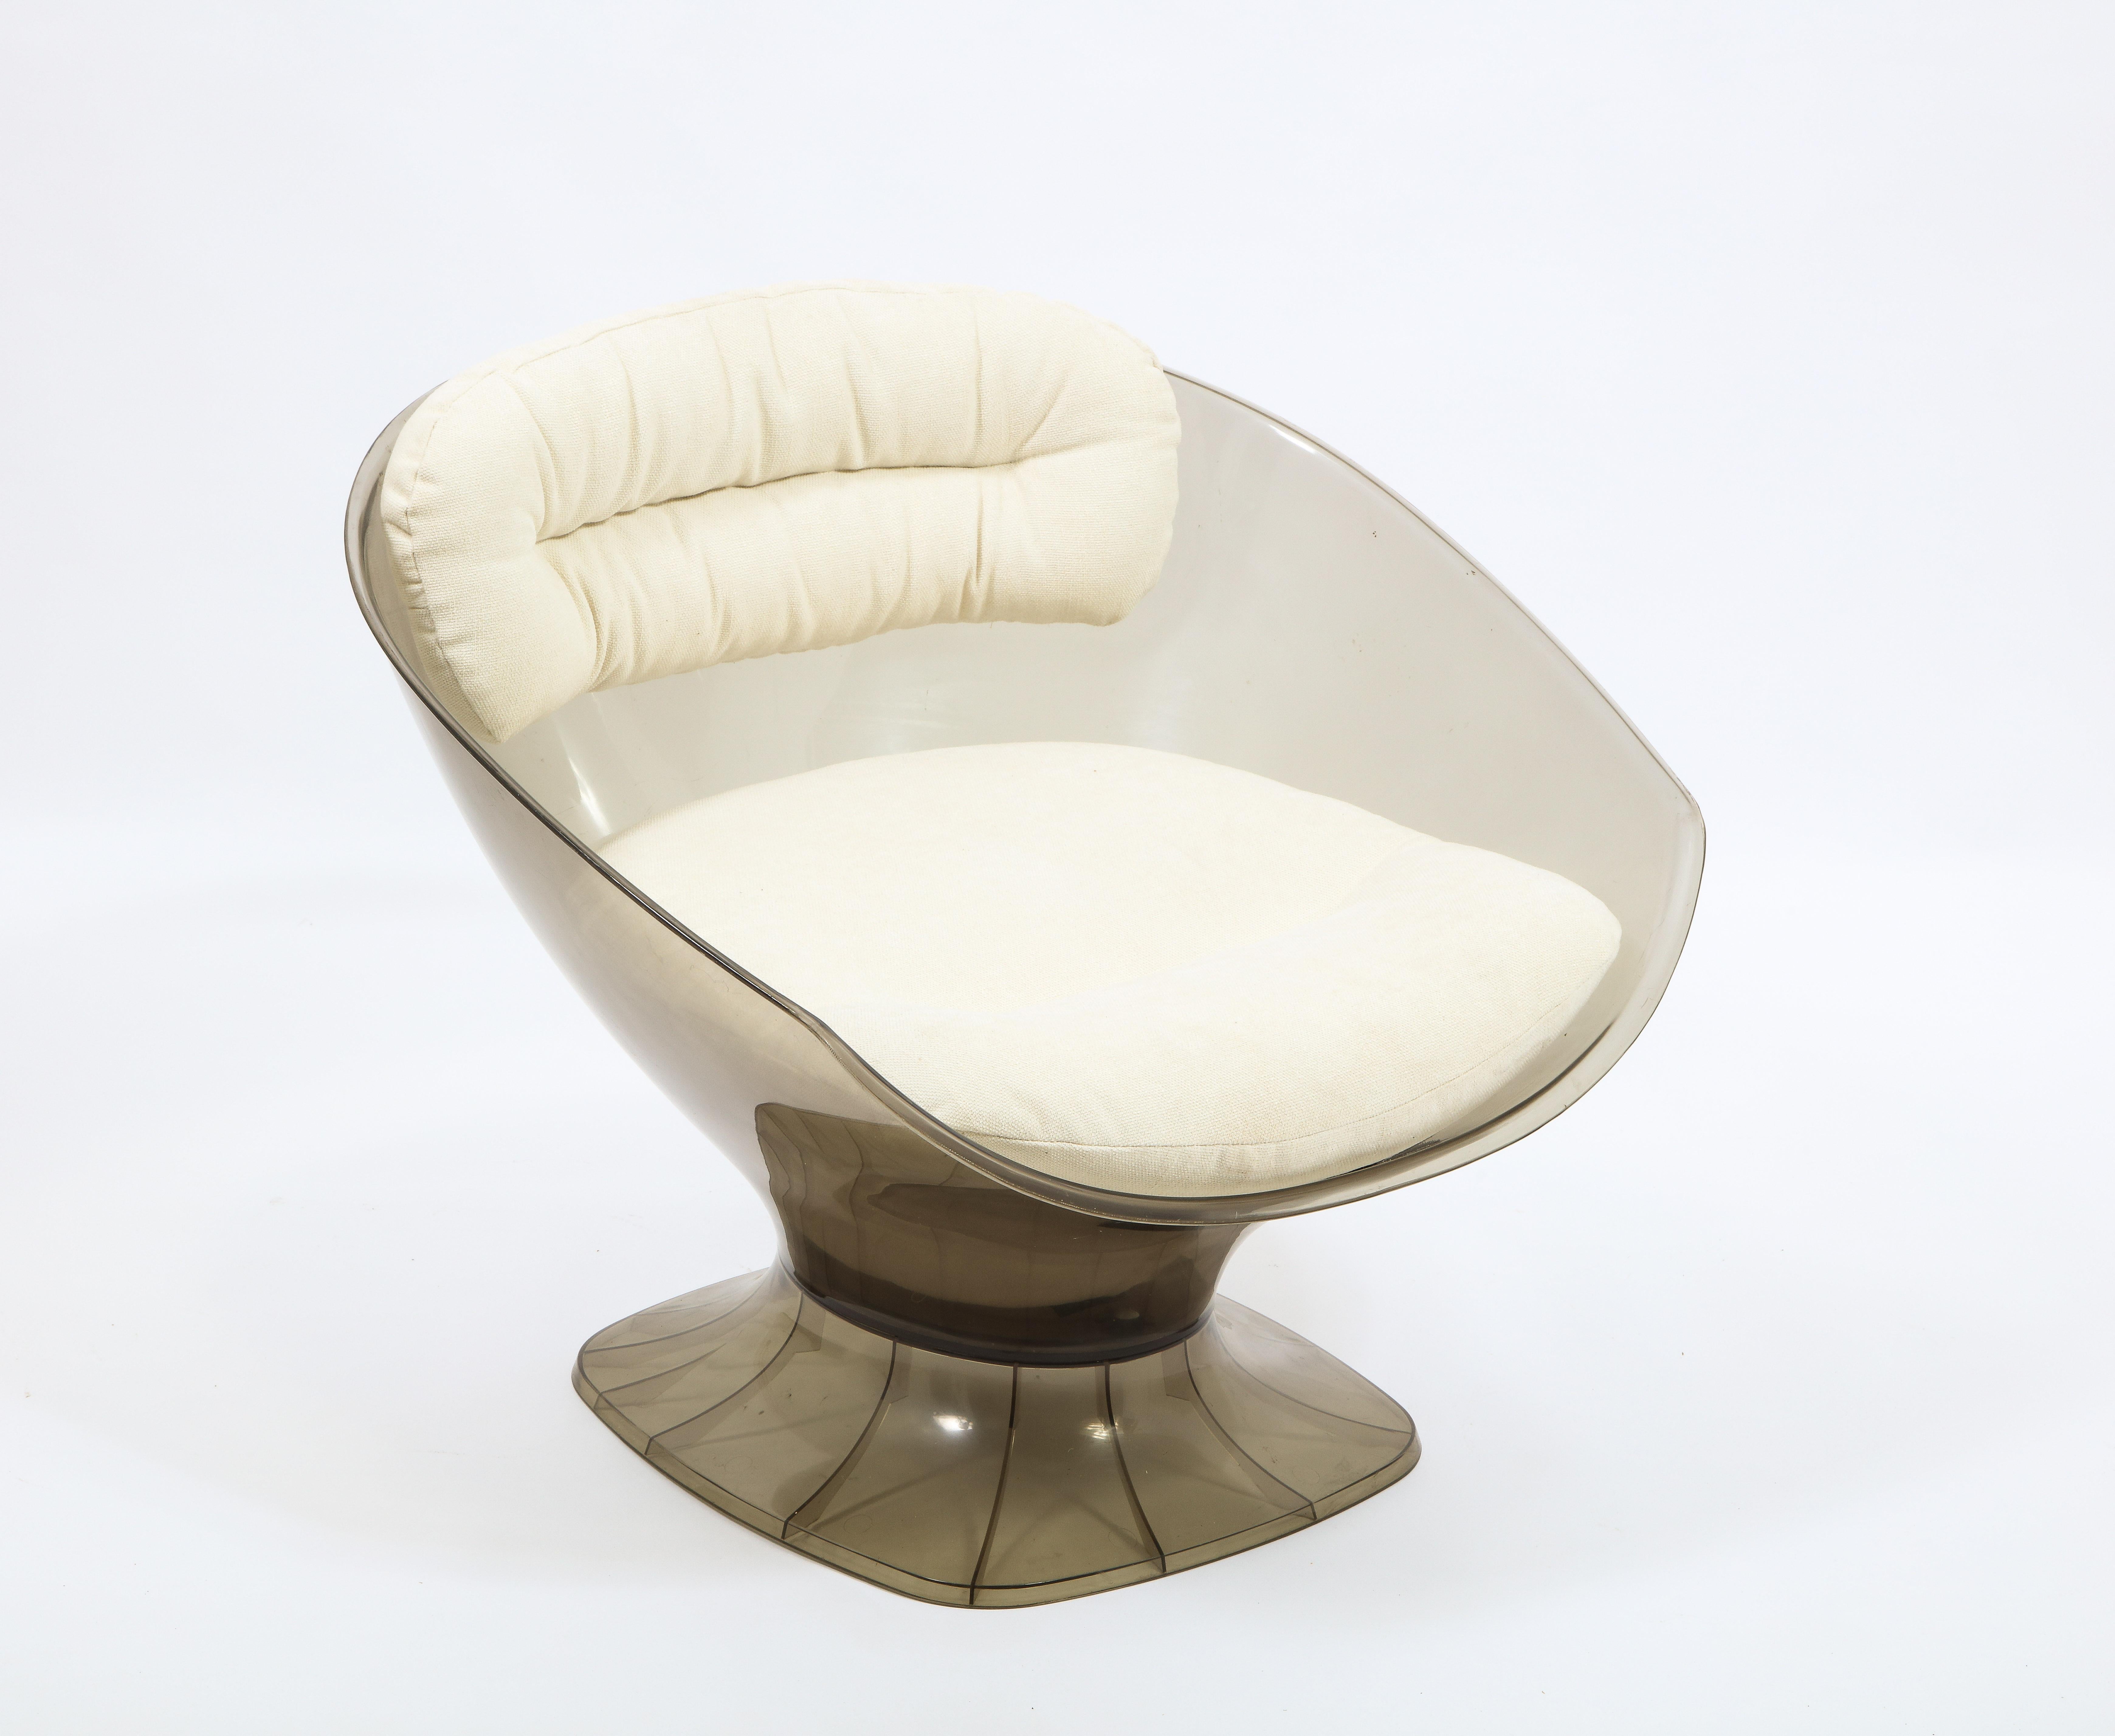 Raphaël Décorateur Pair of Smoked Acrylic Lounge Chairs, France 1960's For Sale 4